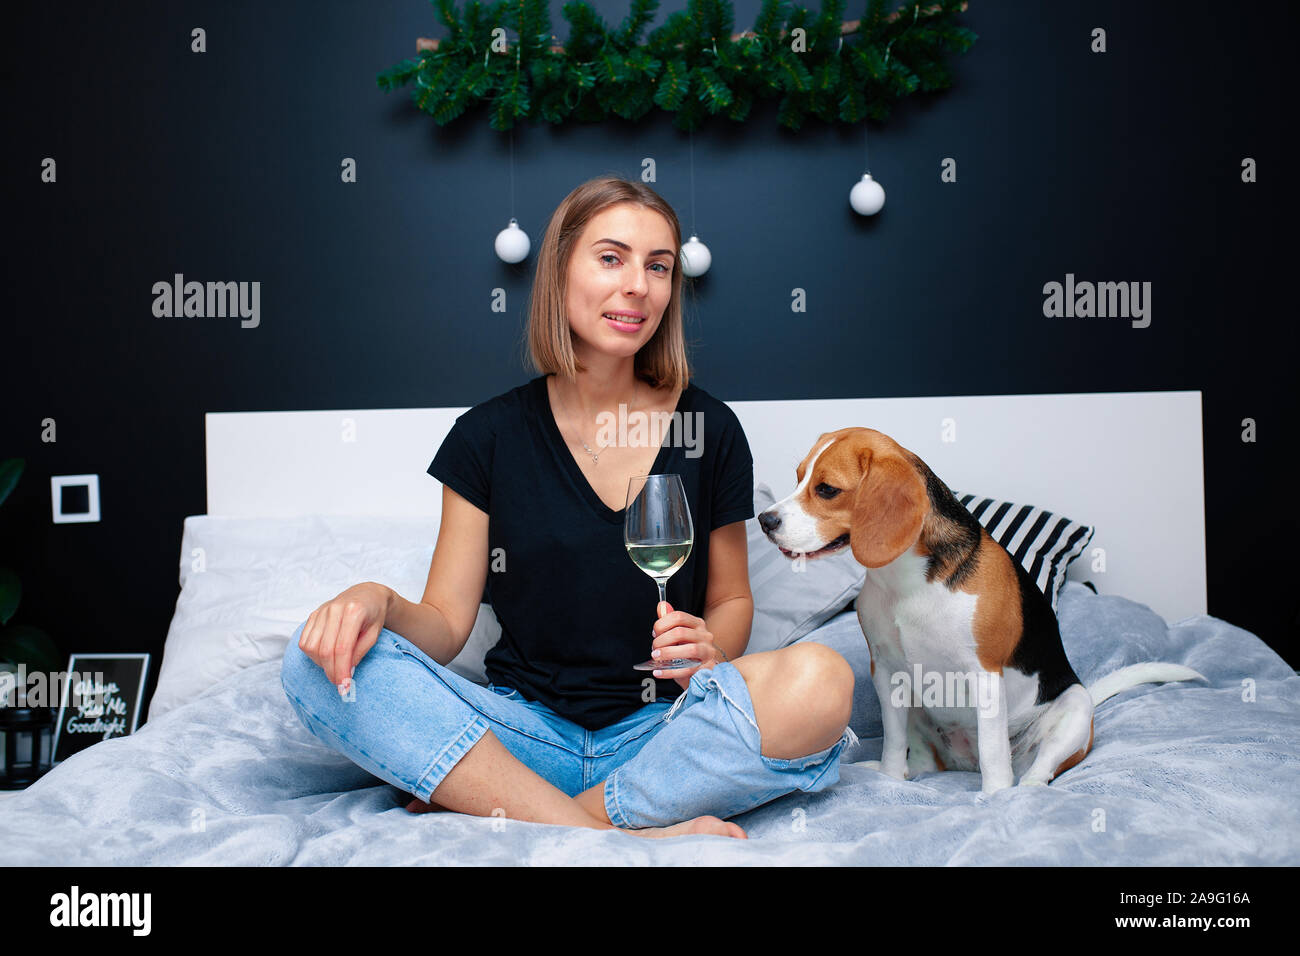 Young beautiful woman playing with dog sitting on bed in a stylish bedroom. Domestic animals at home. Beagle dog. Friendship. Comfort cosiness Stock Photo